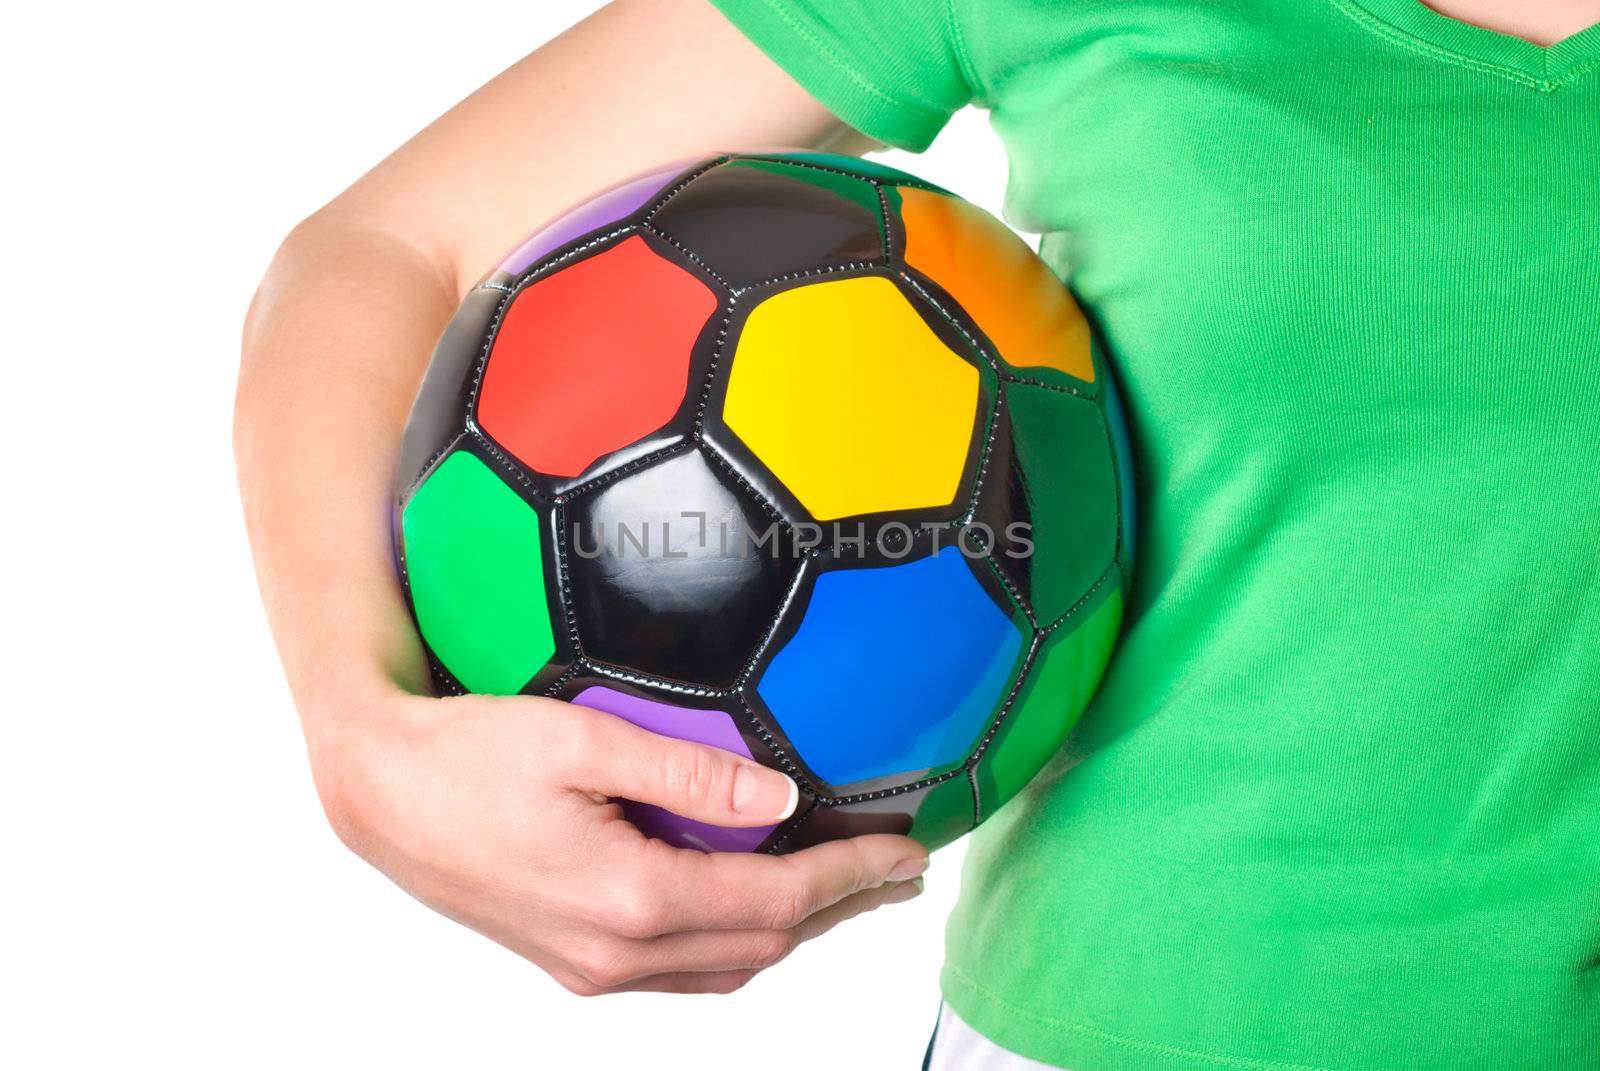 Colored soccer ball in a girl's hand by Givaga